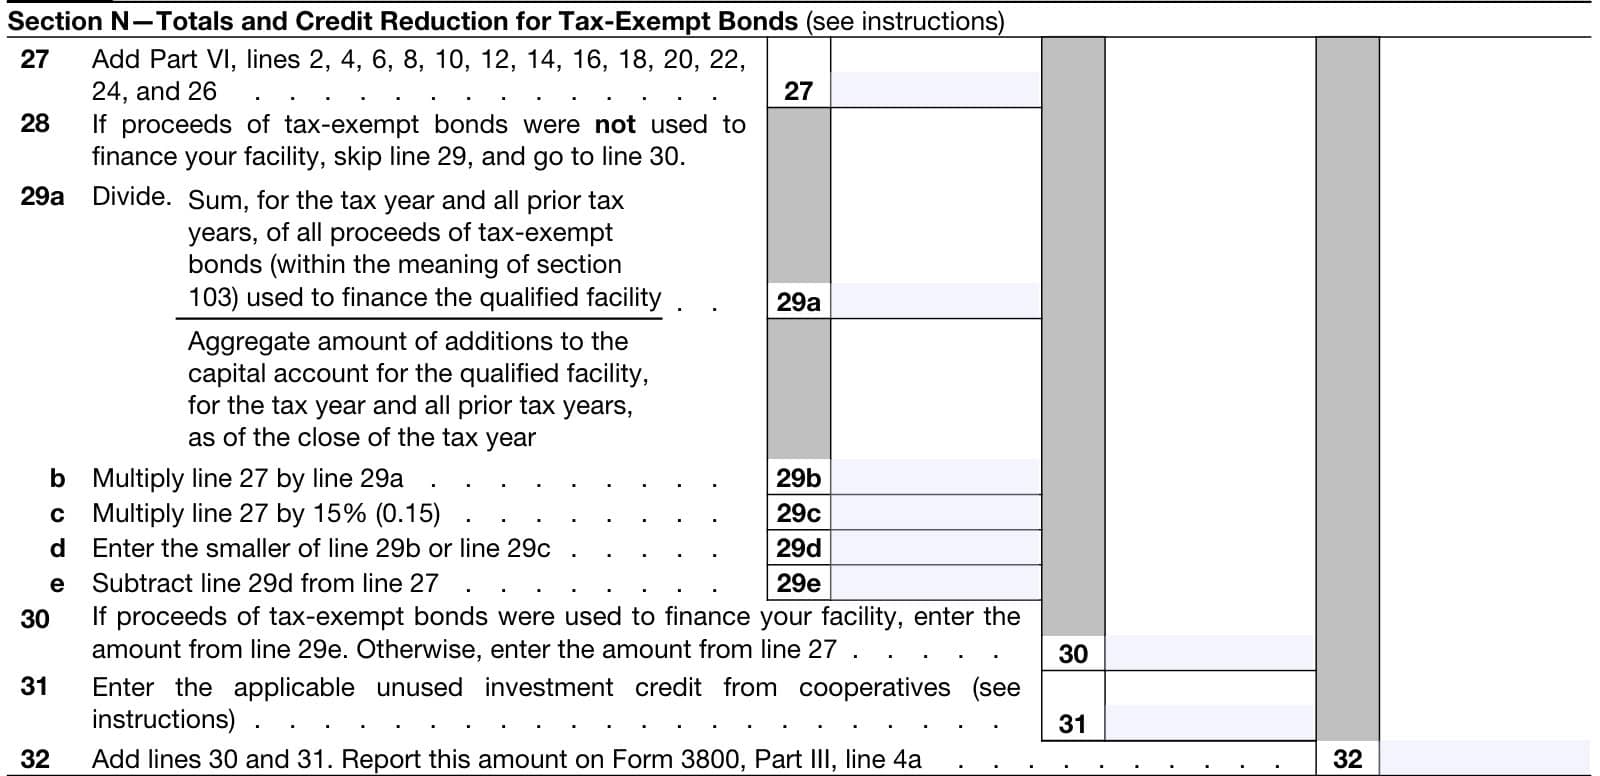 irs form 3468, part vi, section n: totals and credit reduction for tax-exempt bonds